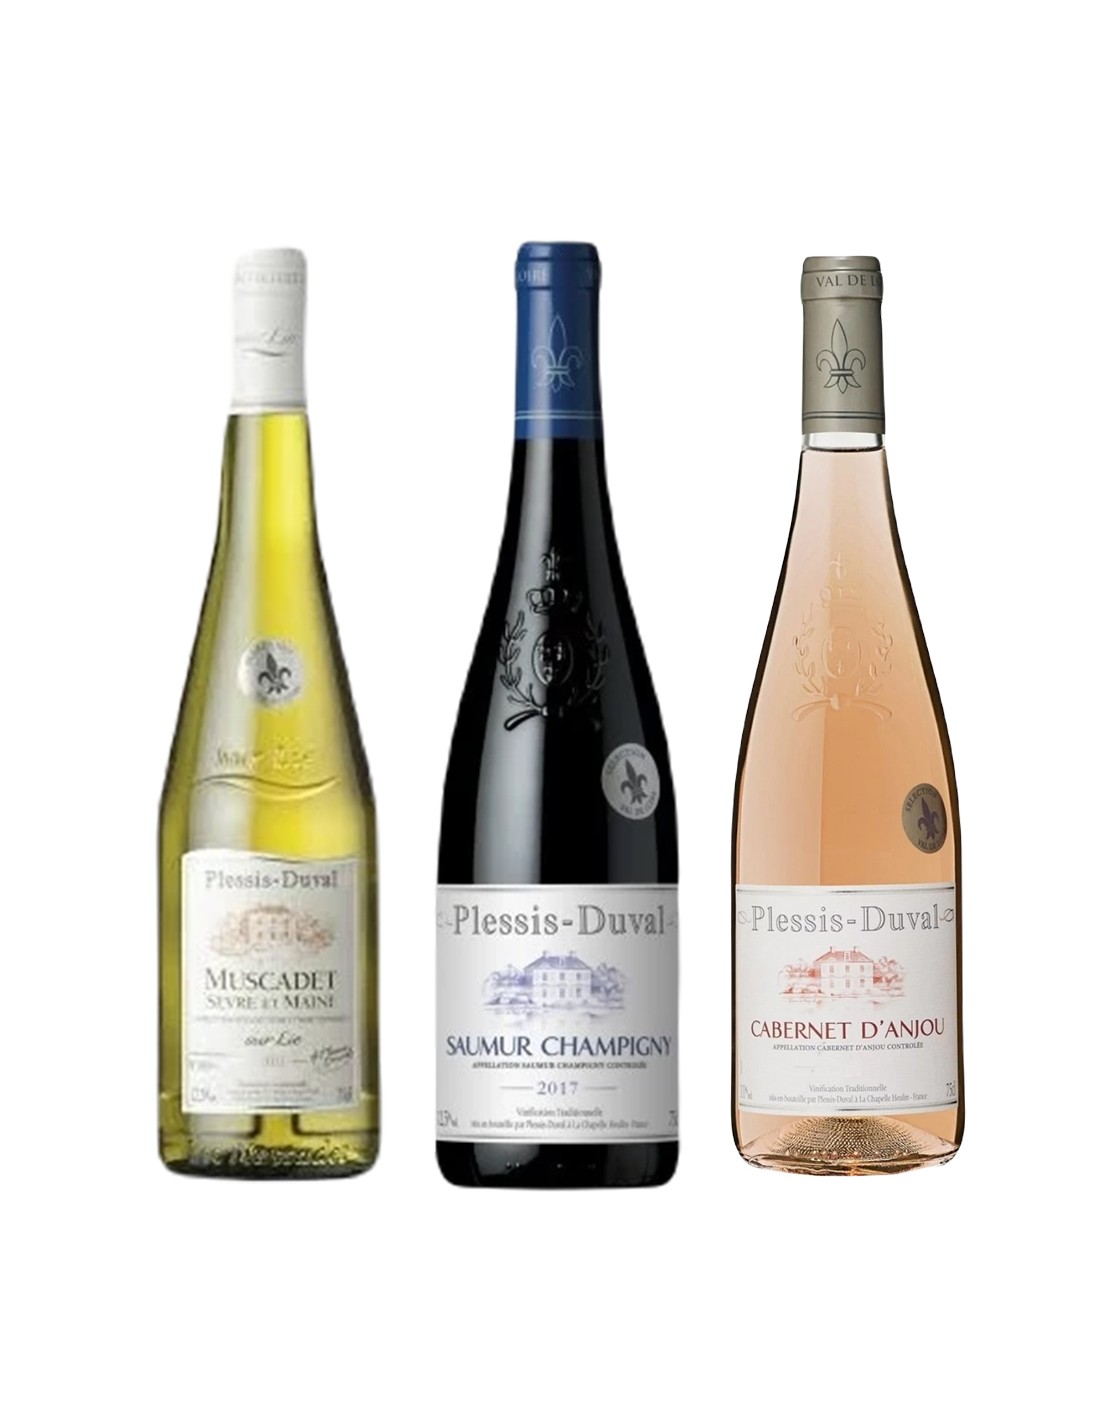 Pachet Plessis Duval French Wine Collection alcooldiscount.ro